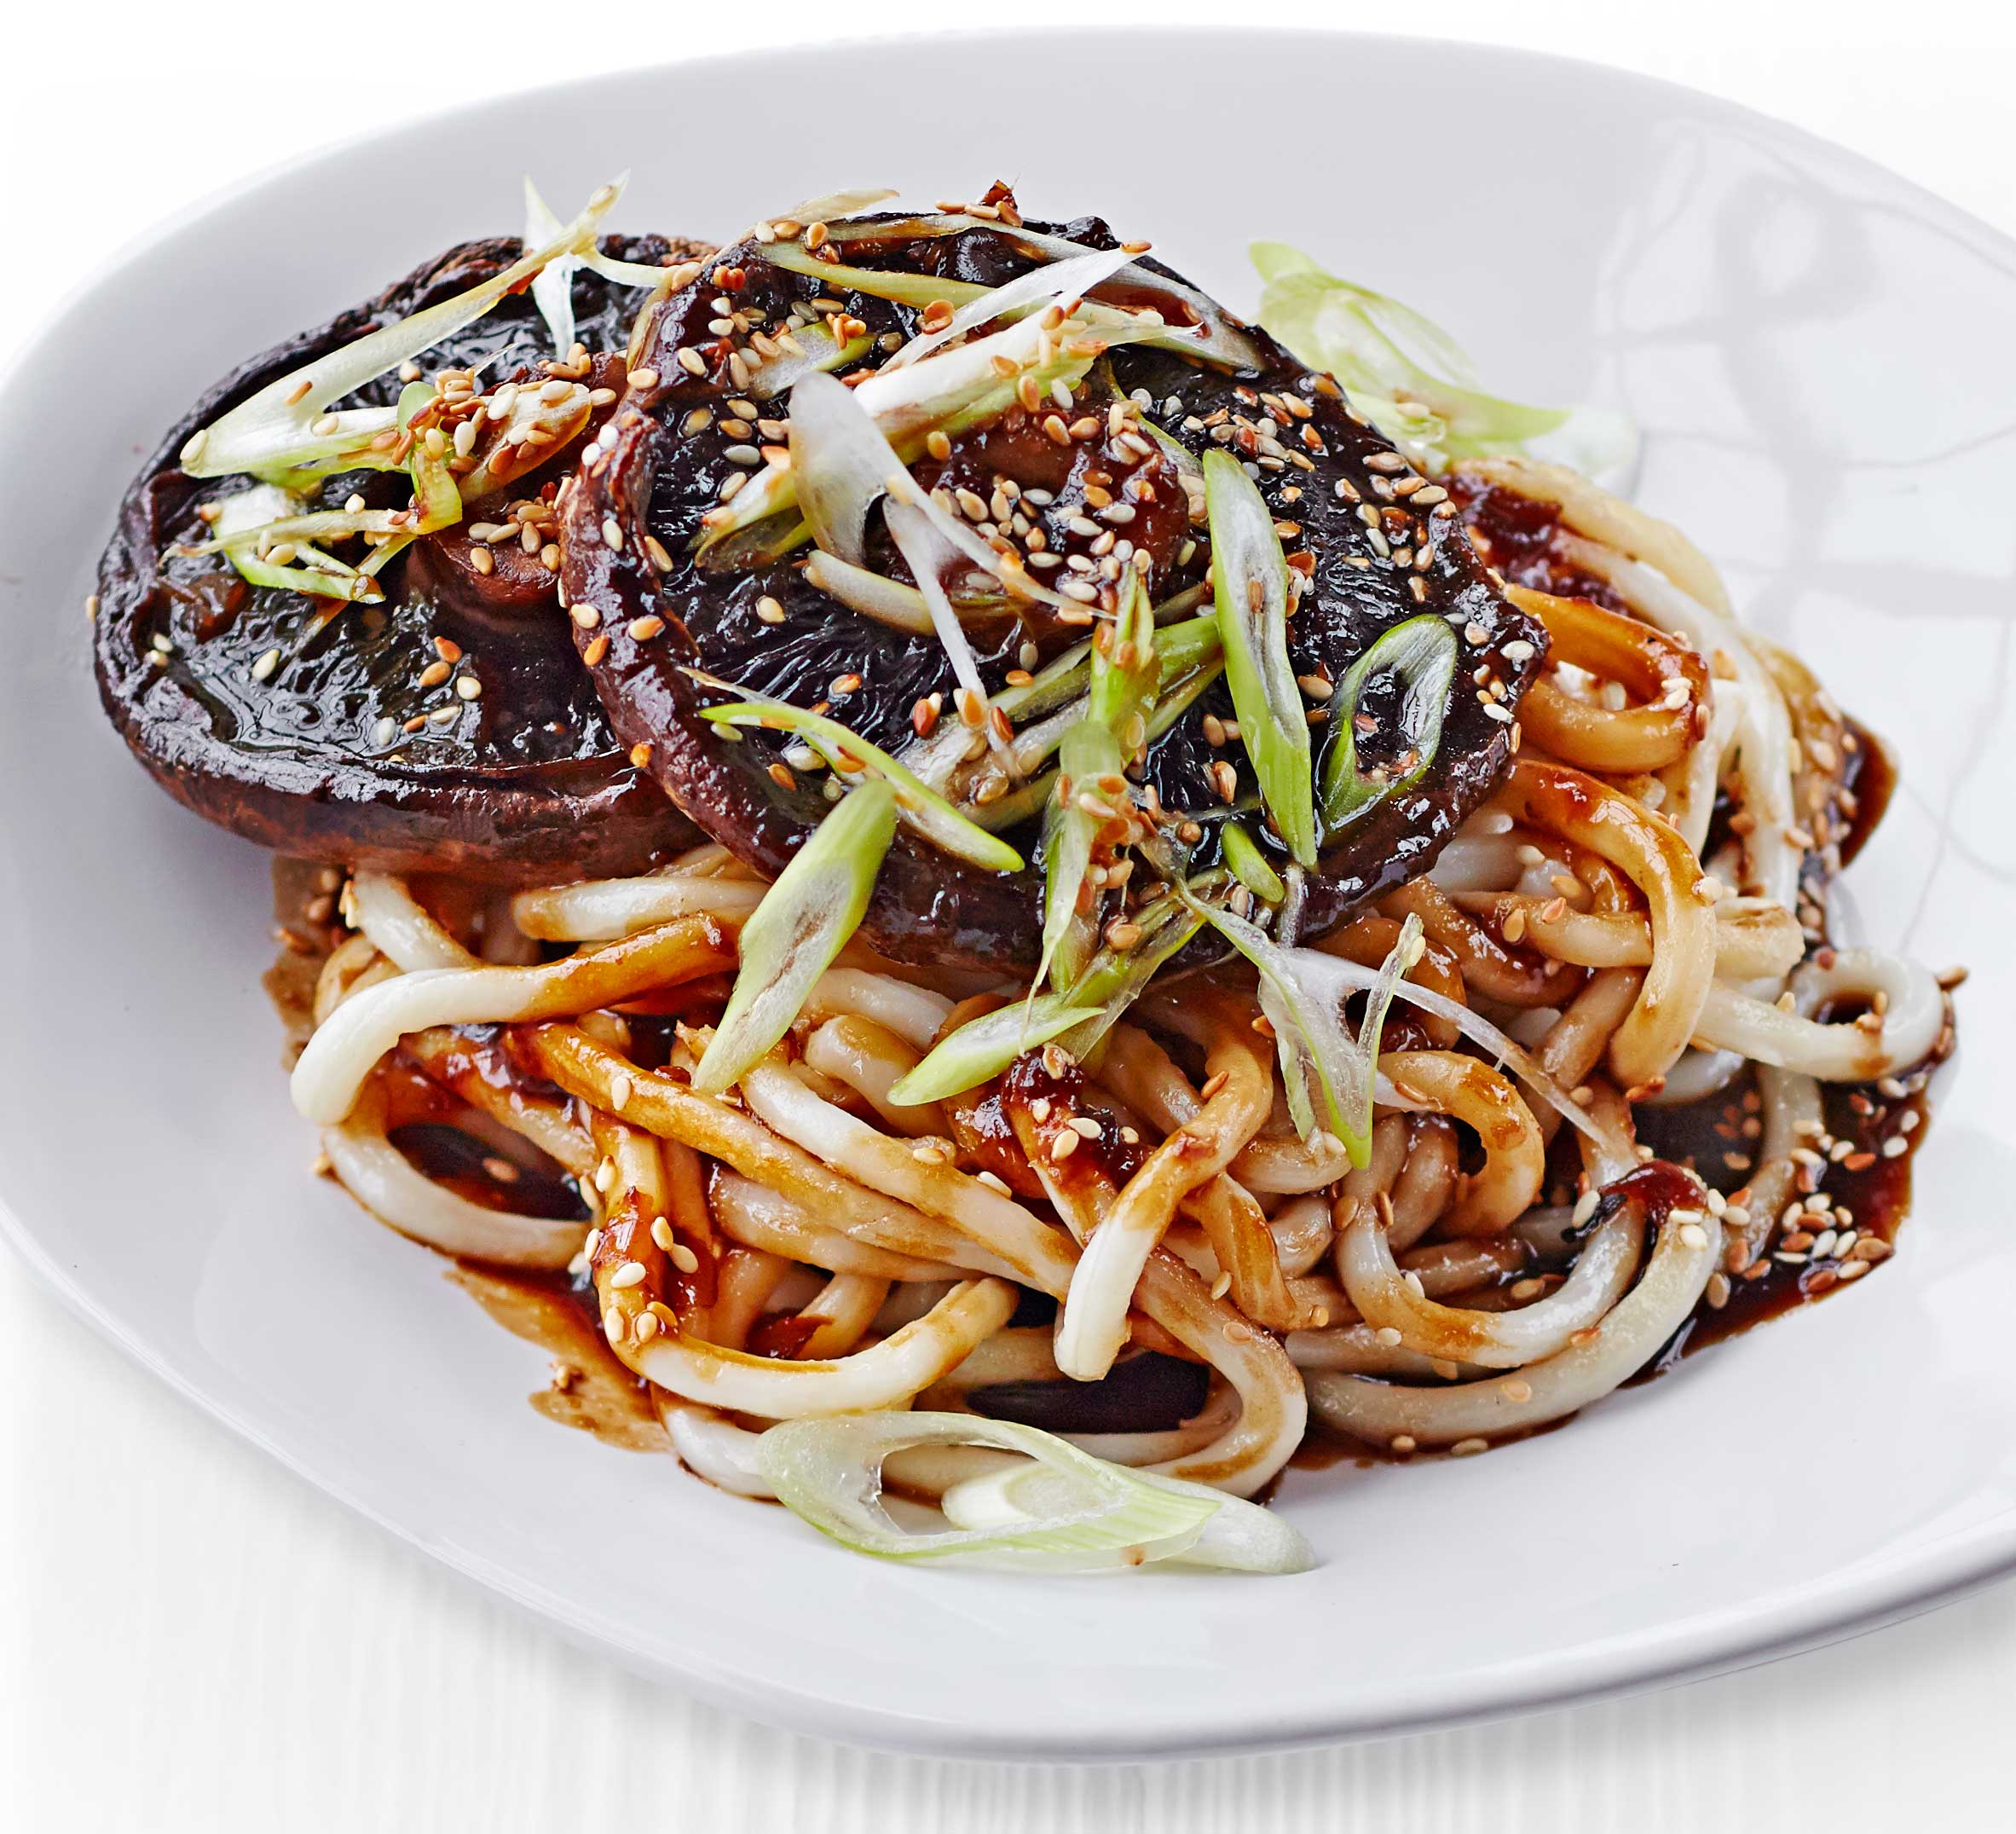 Saucy miso mushrooms with udon noodles